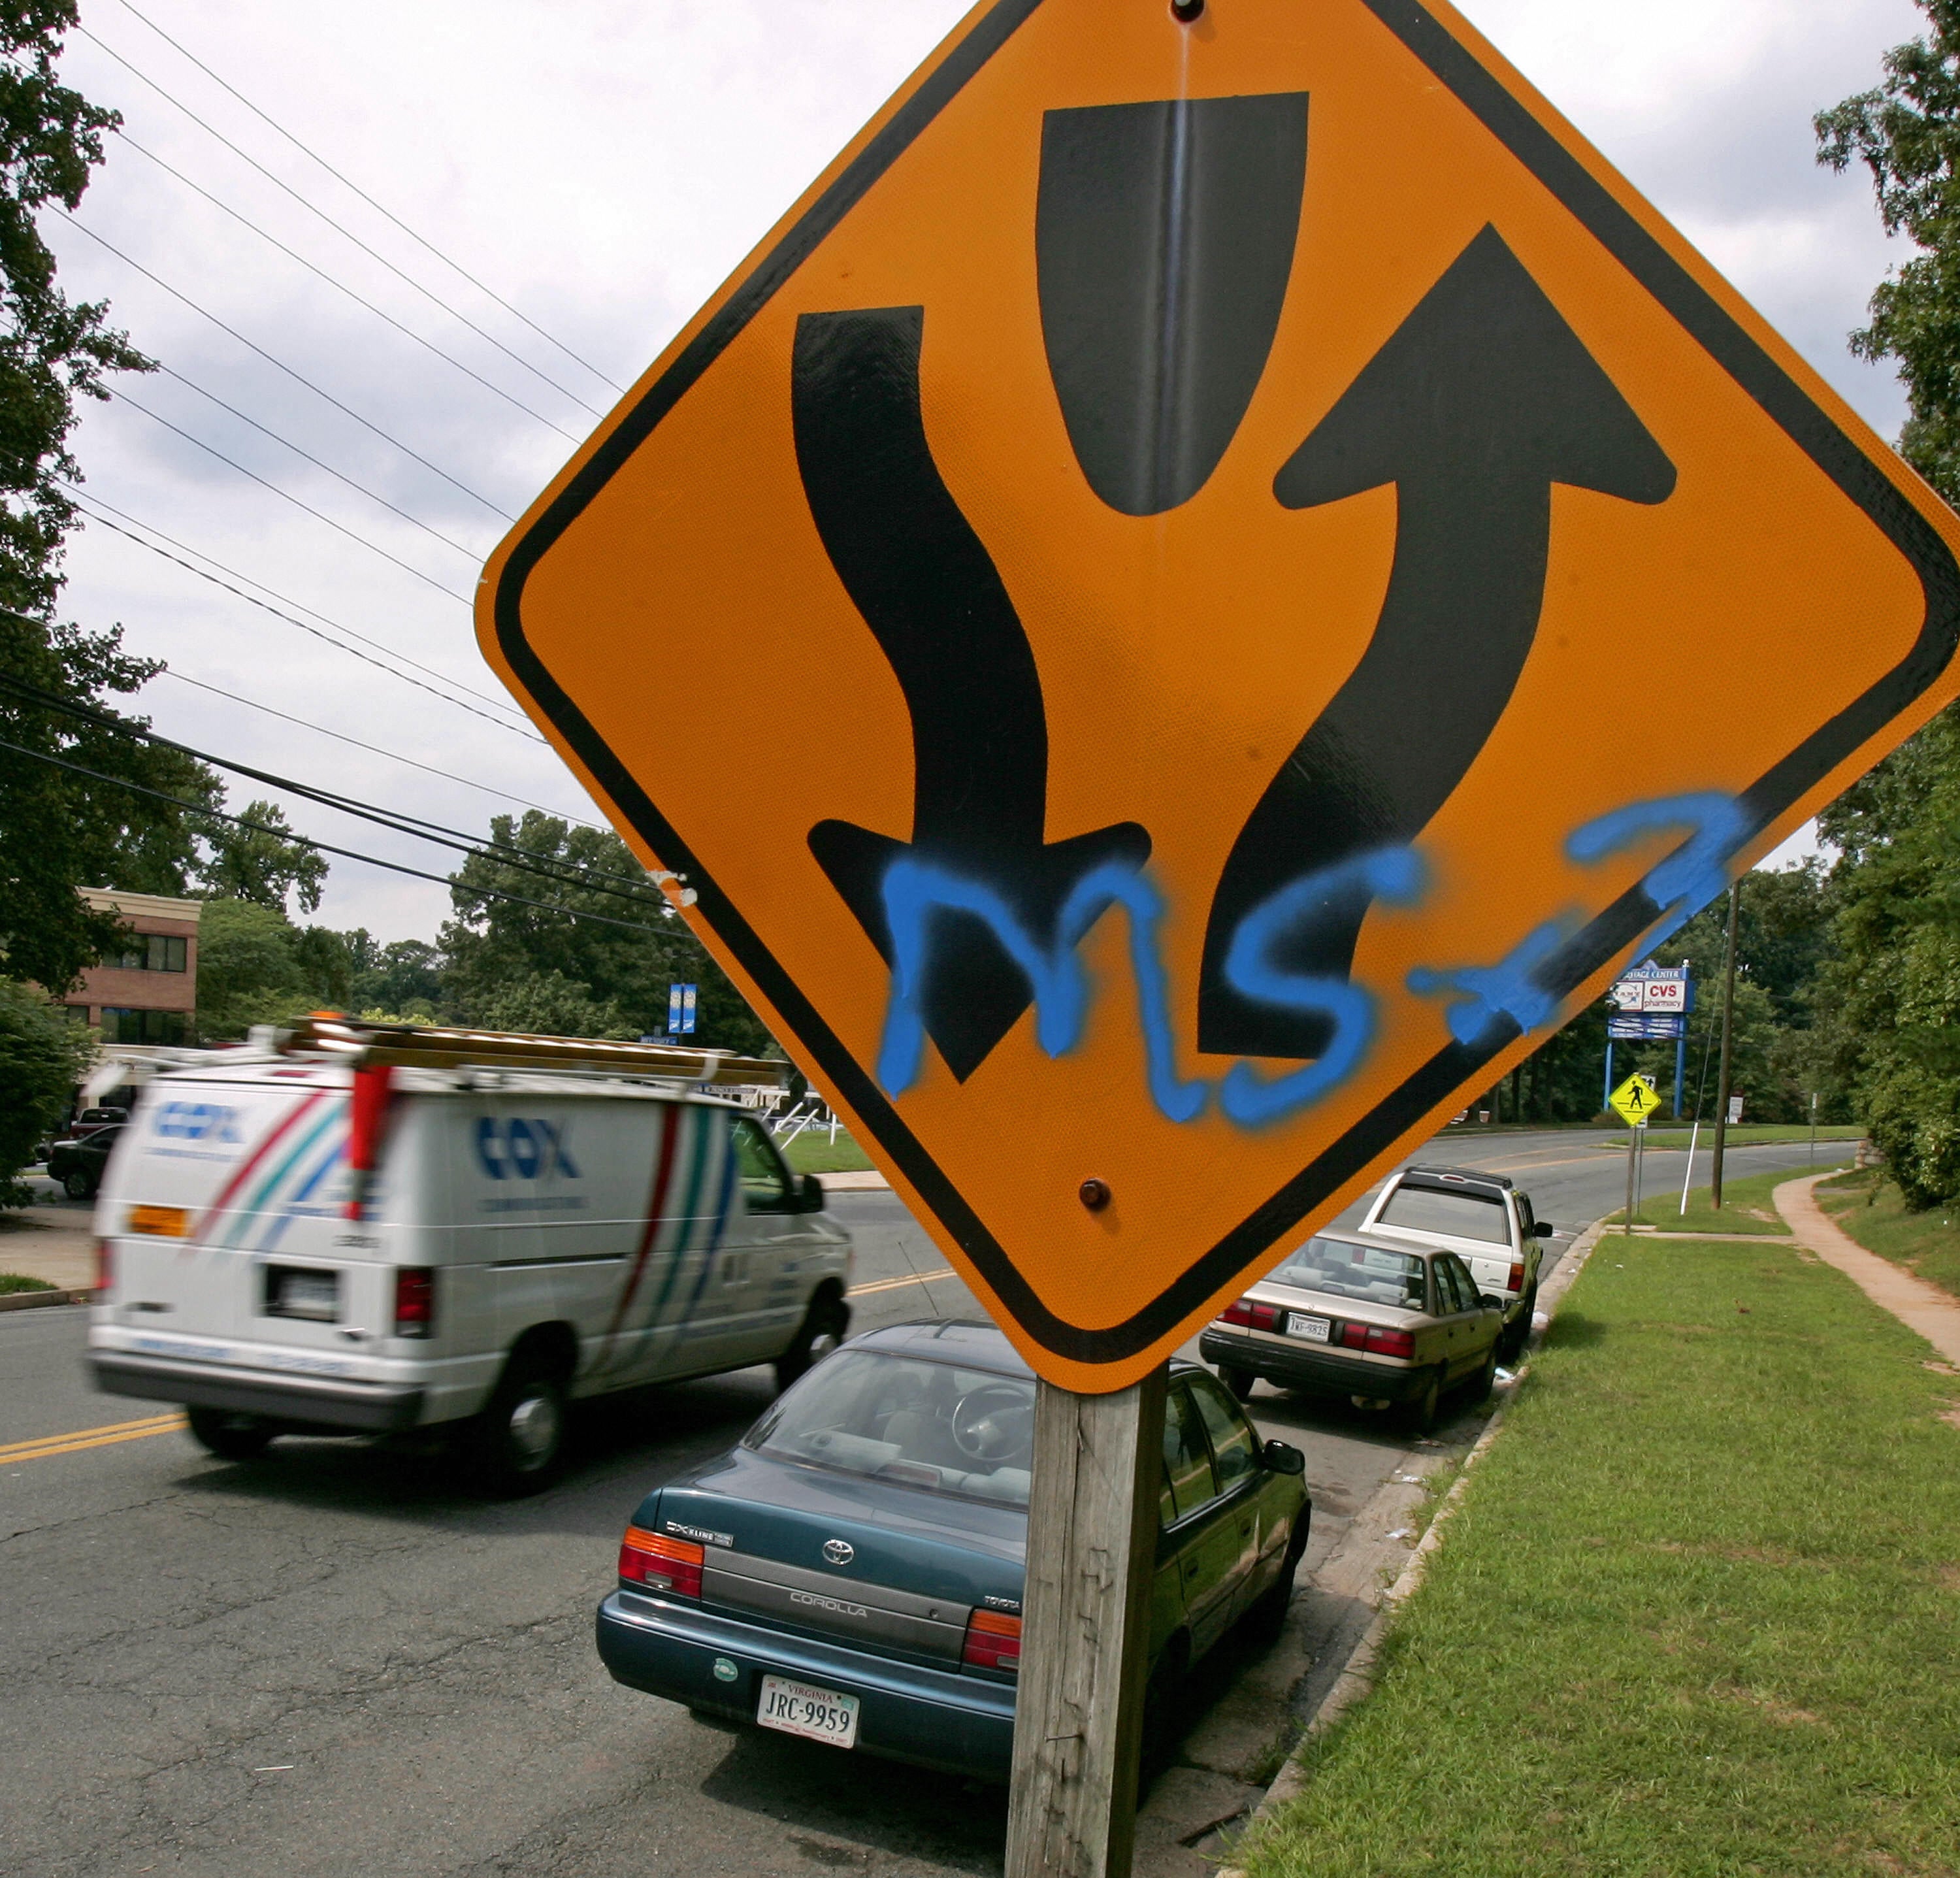 A typical traffic sign carries an extra message indicating it as territory for the El Salvaldorian gang MS-13 near Annandale High School in the Washington DC, suburb of Annandale, Virginia.